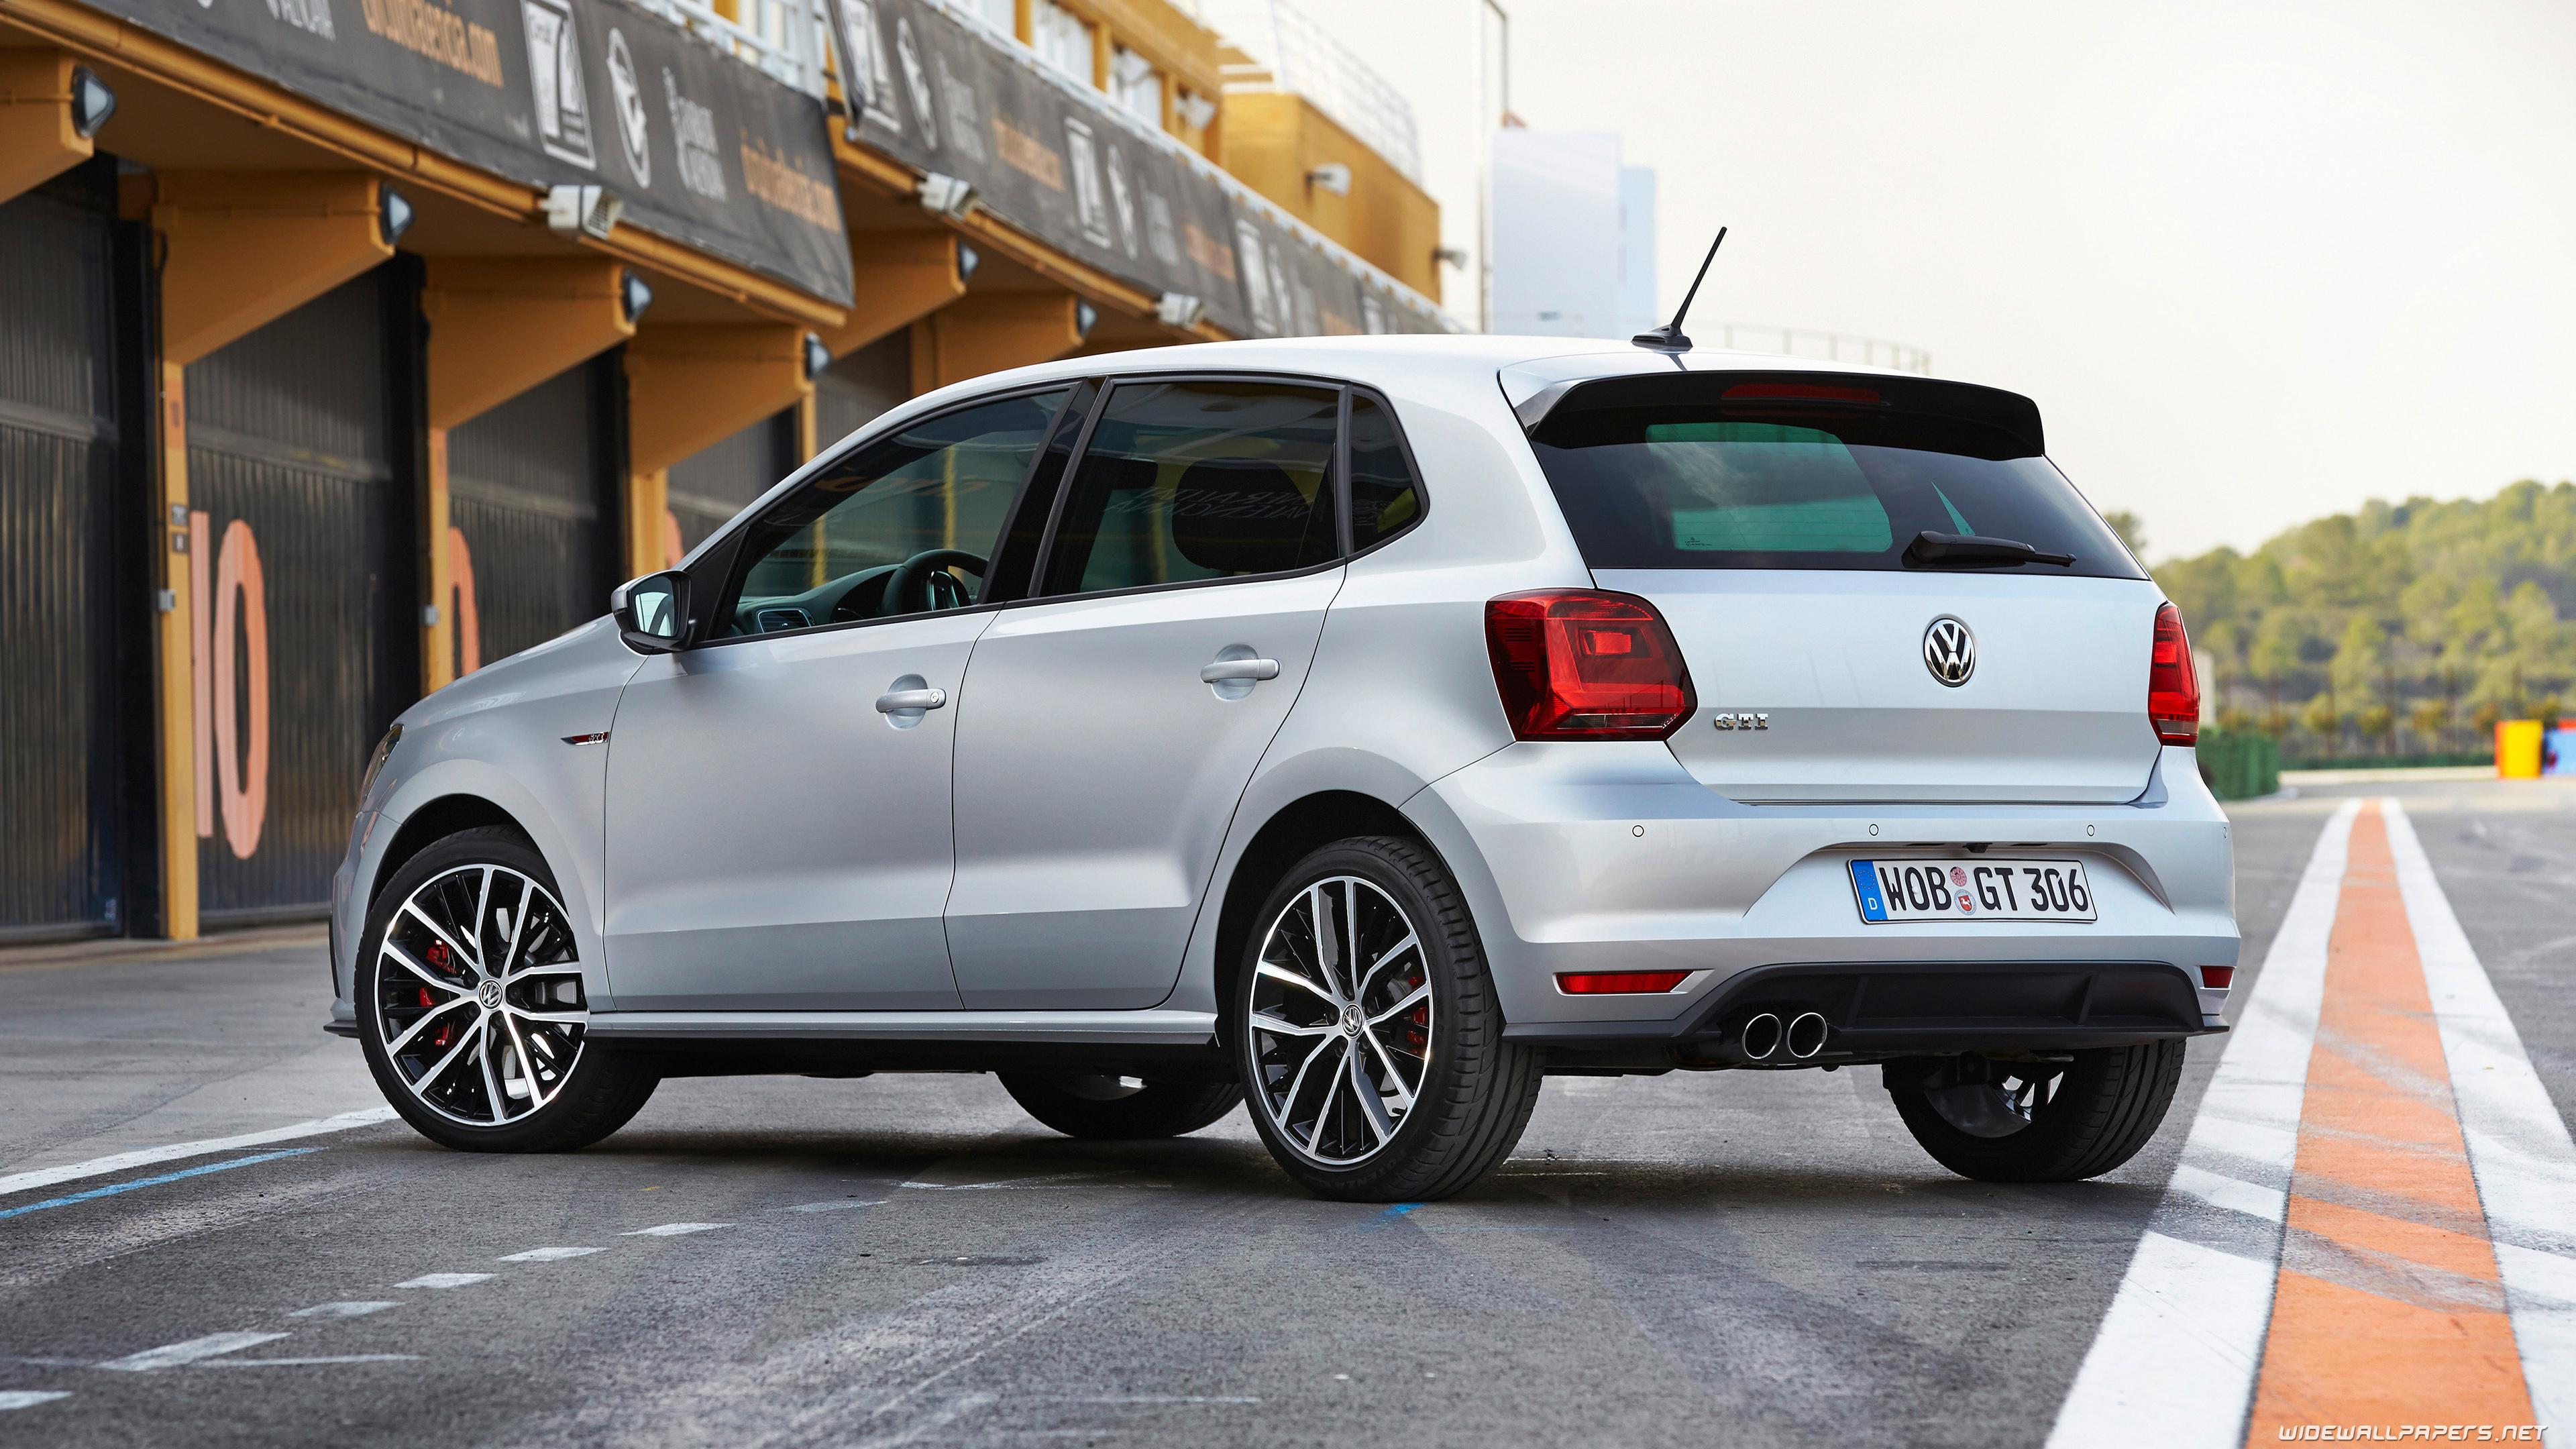 VW Polo Track Teased First Model In New Compact Car Family